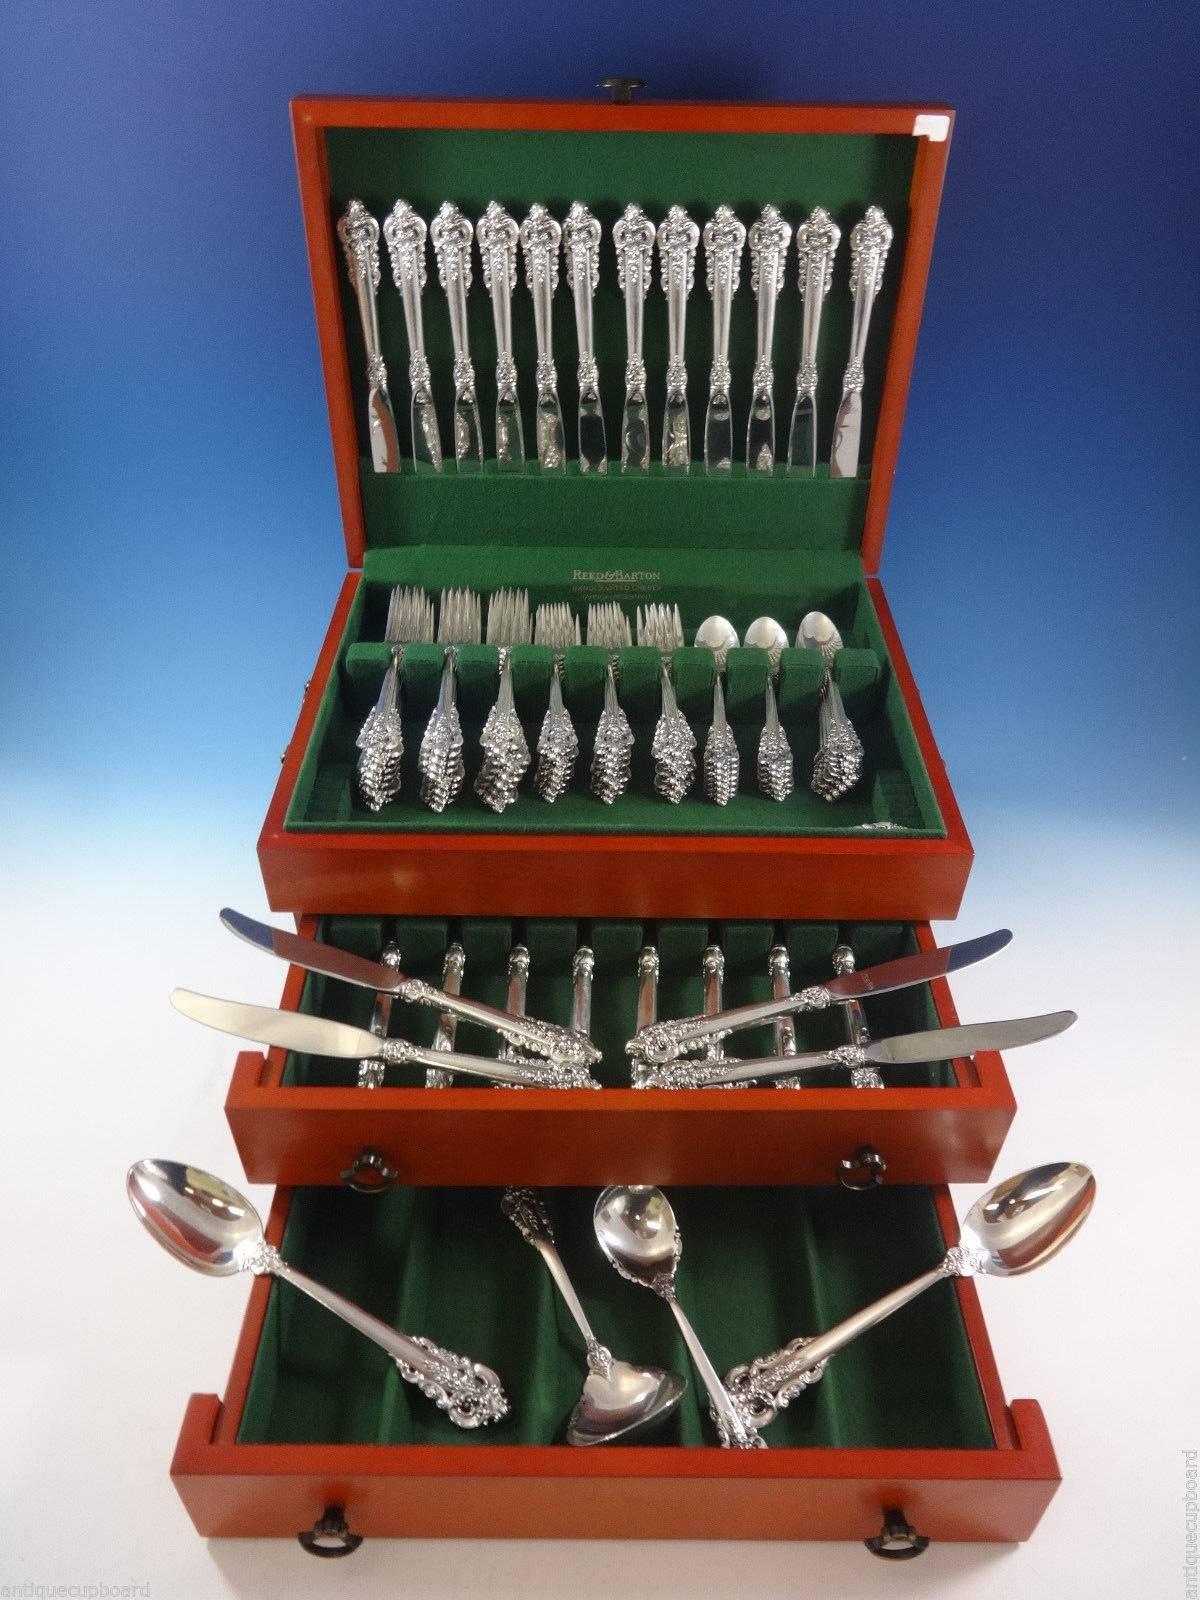 Huge Grande Baroque by Wallace sterling silver flatware set, 100 pieces:

24 knives 8 7/8